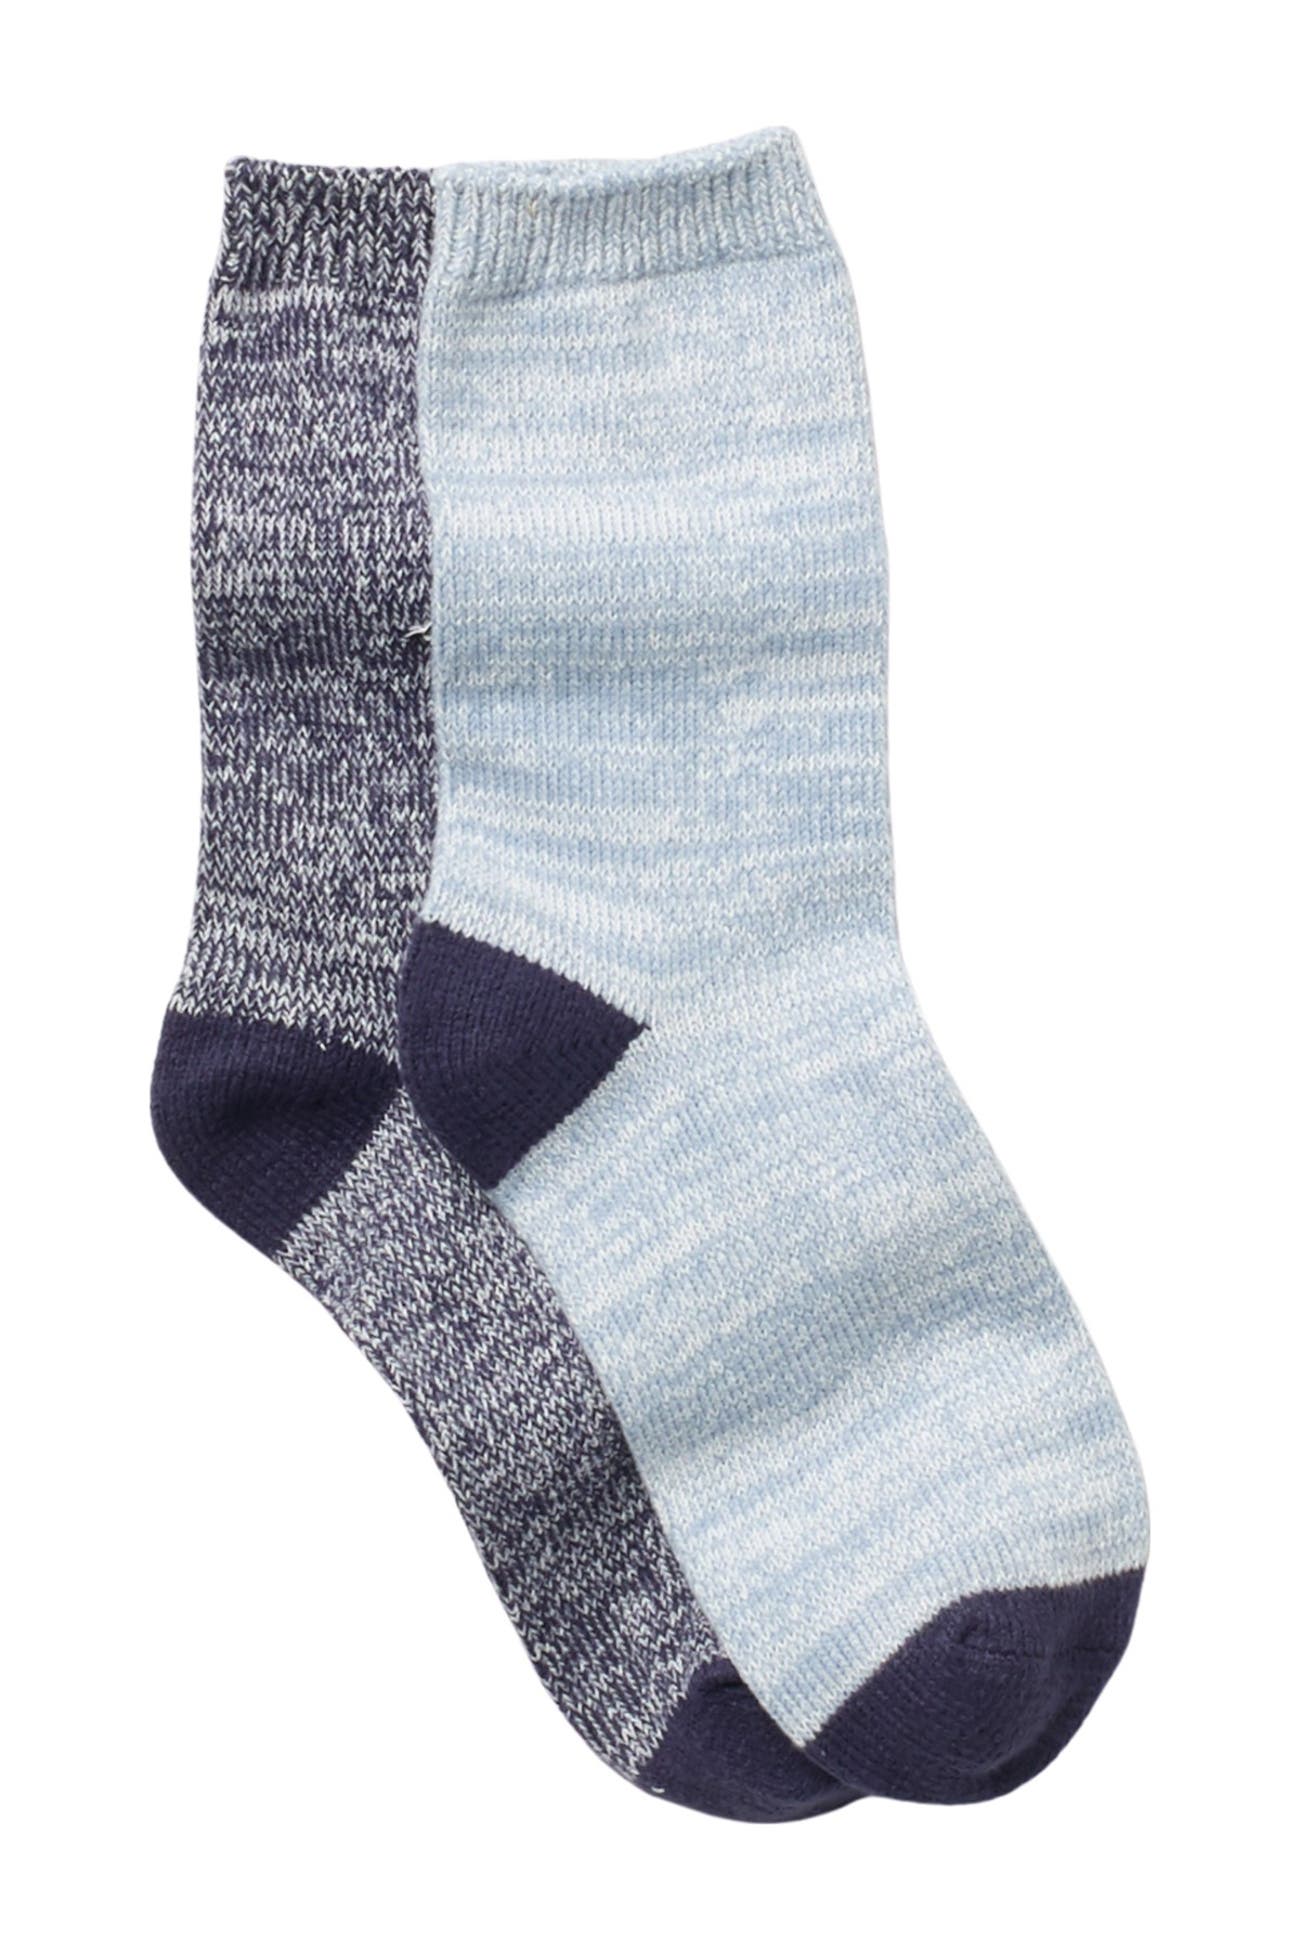 Jessica Simpson | Marbled Knit Crew Socks - Pack of 2 | Nordstrom Rack